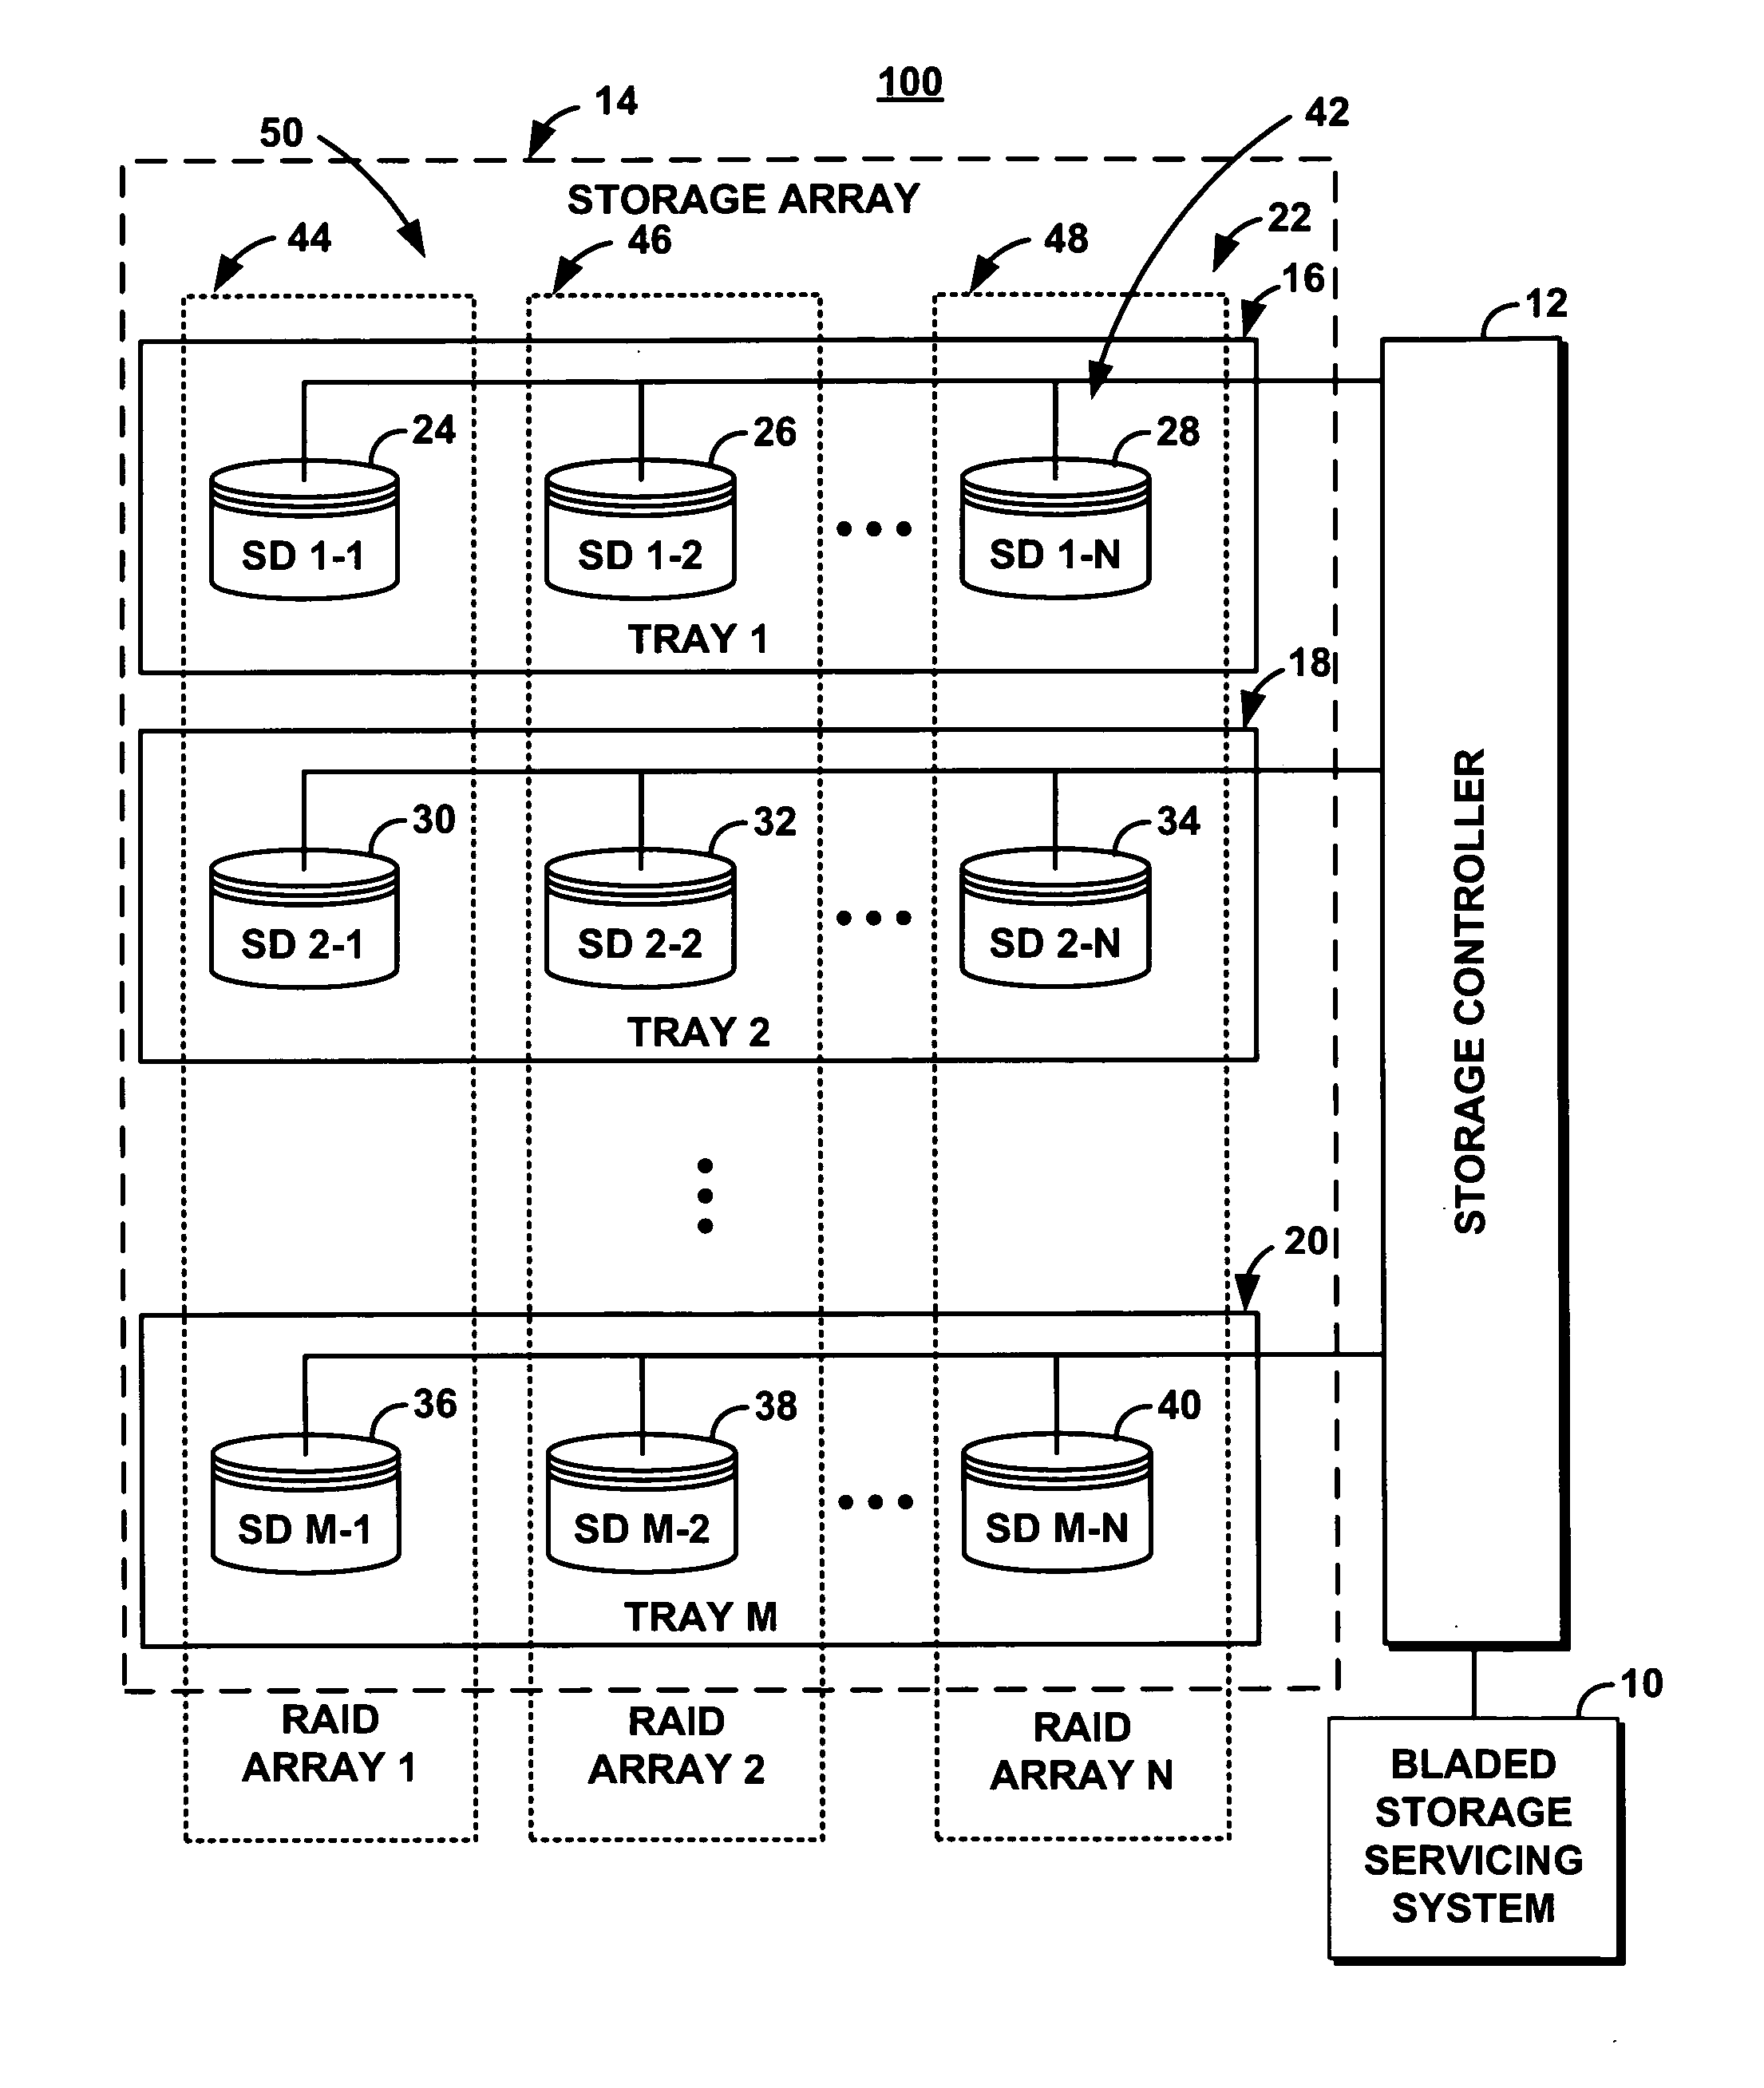 System and method for servicing storage devices in a bladed storage subsystem